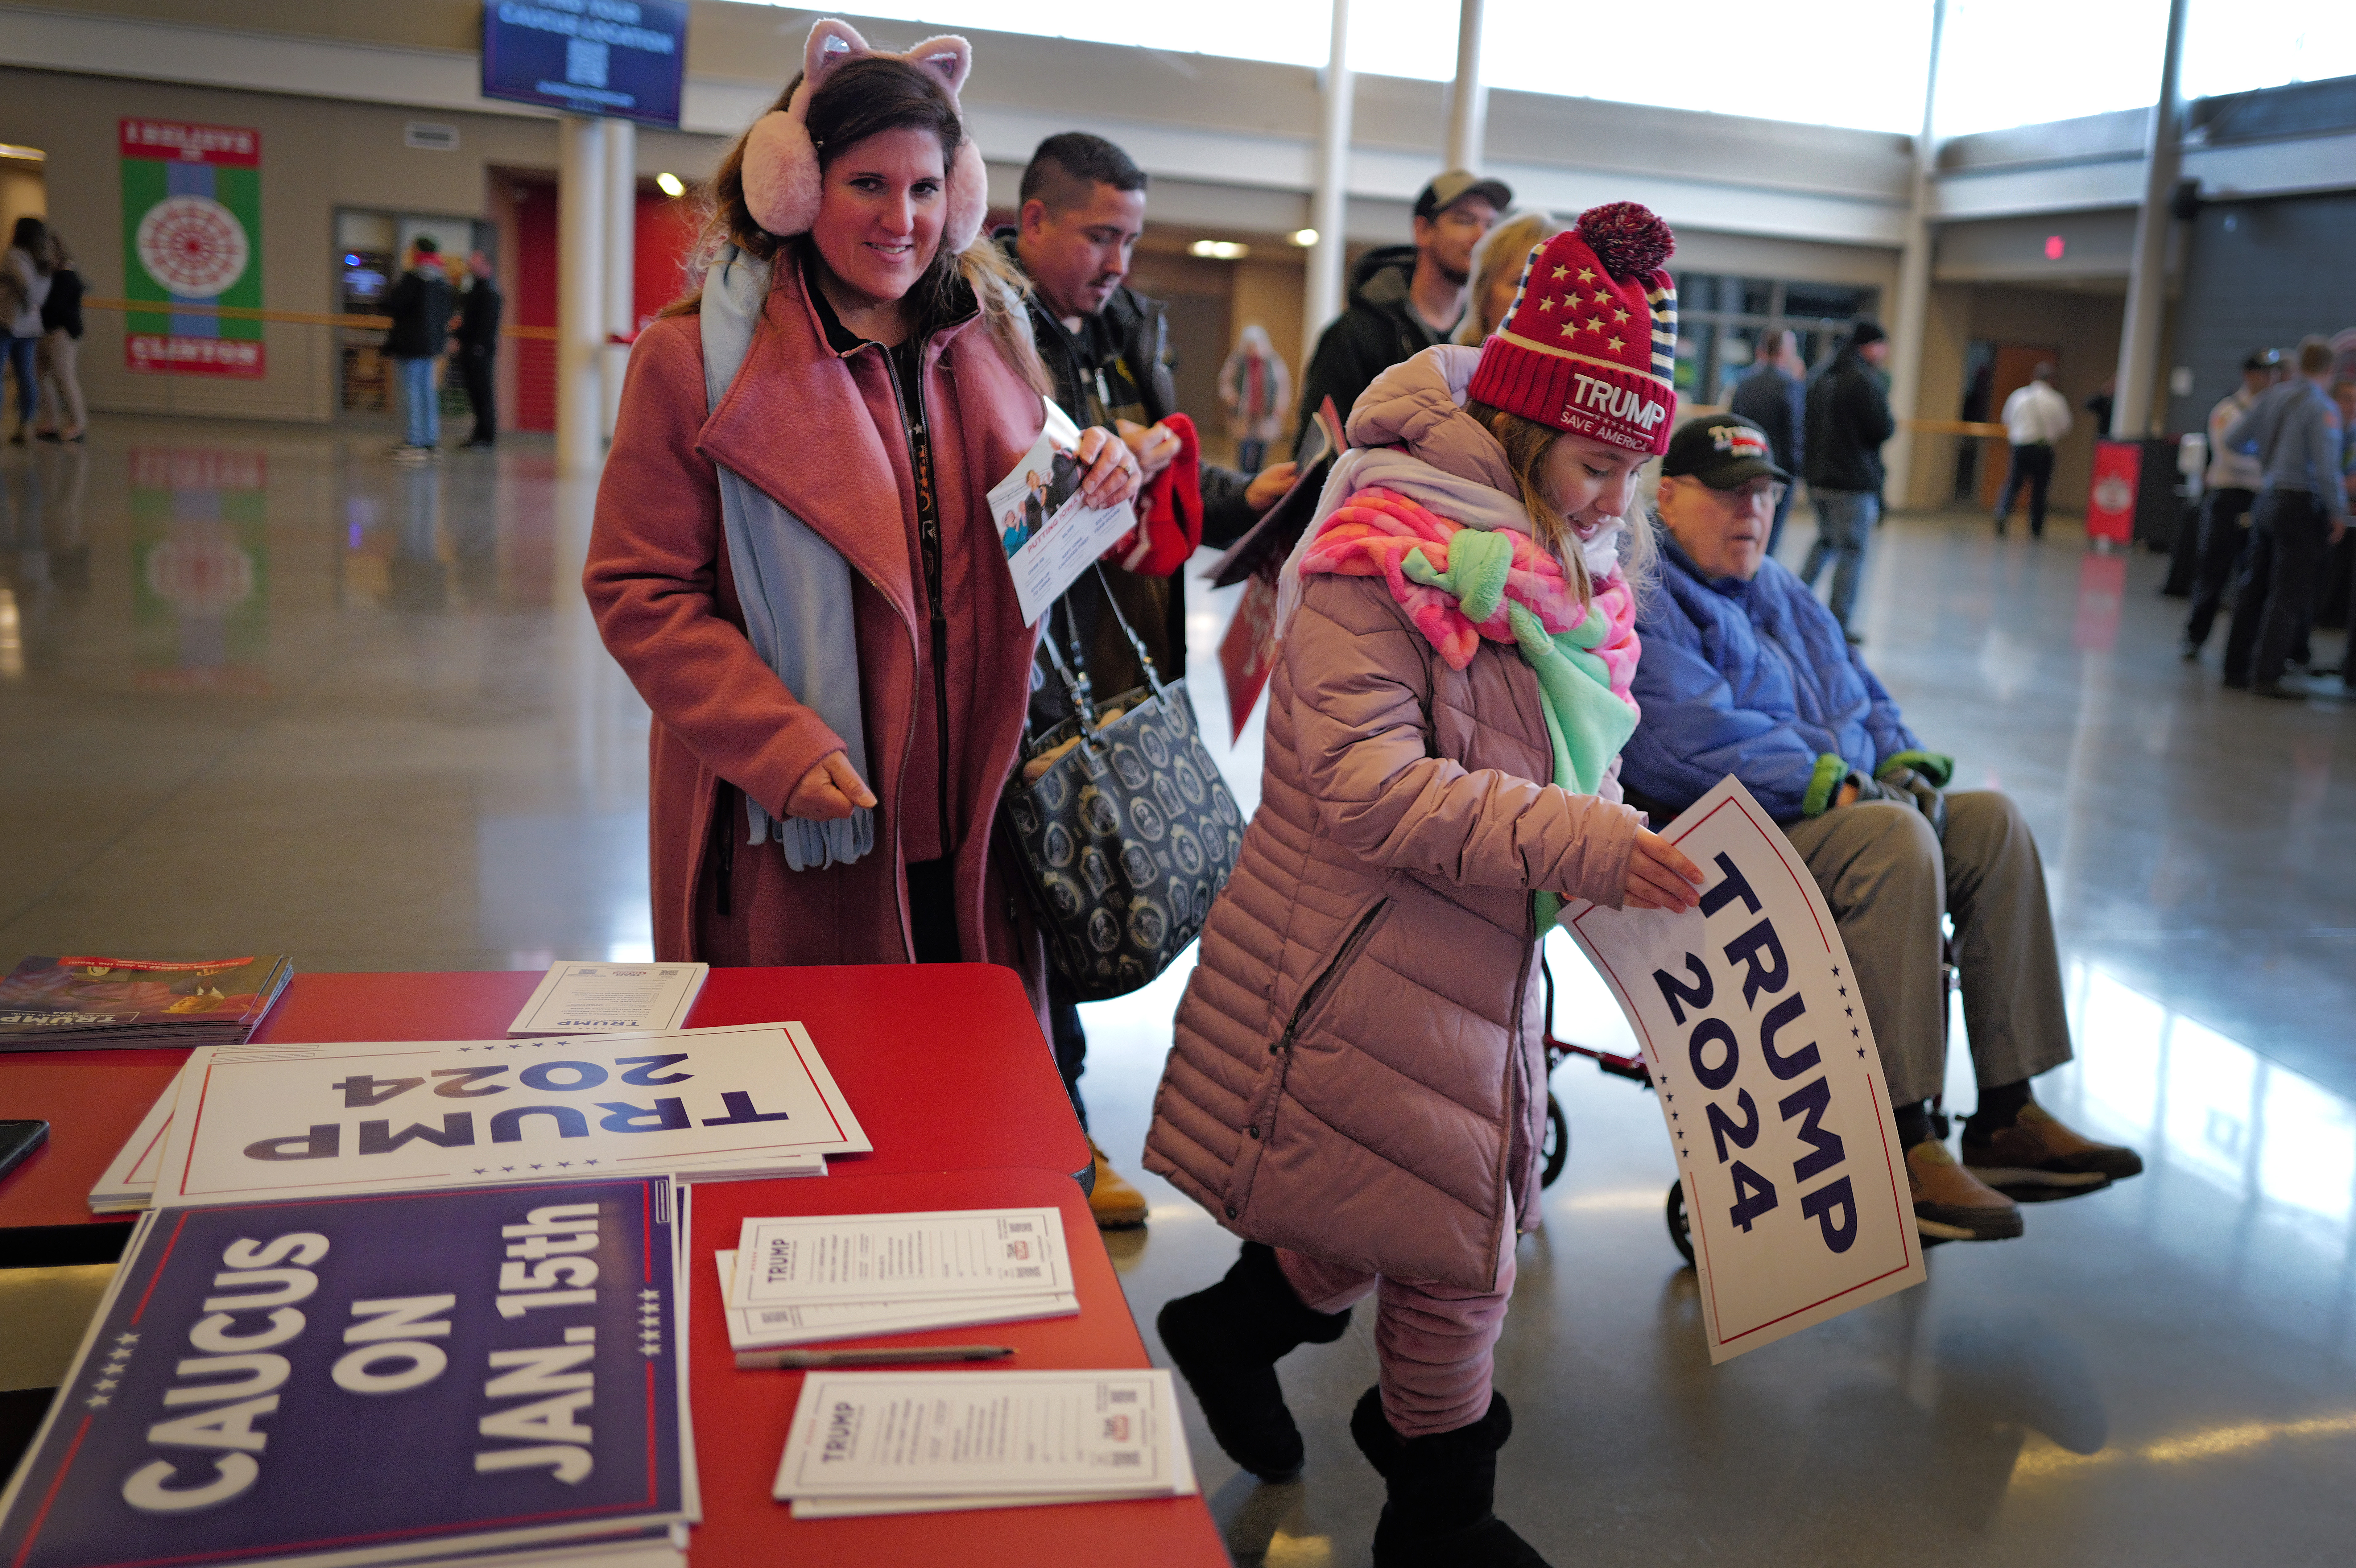 People in winter coats and hats gather in a school building, holding TRUMP 2024 signs and standing next to a table with more signs with political slogans.